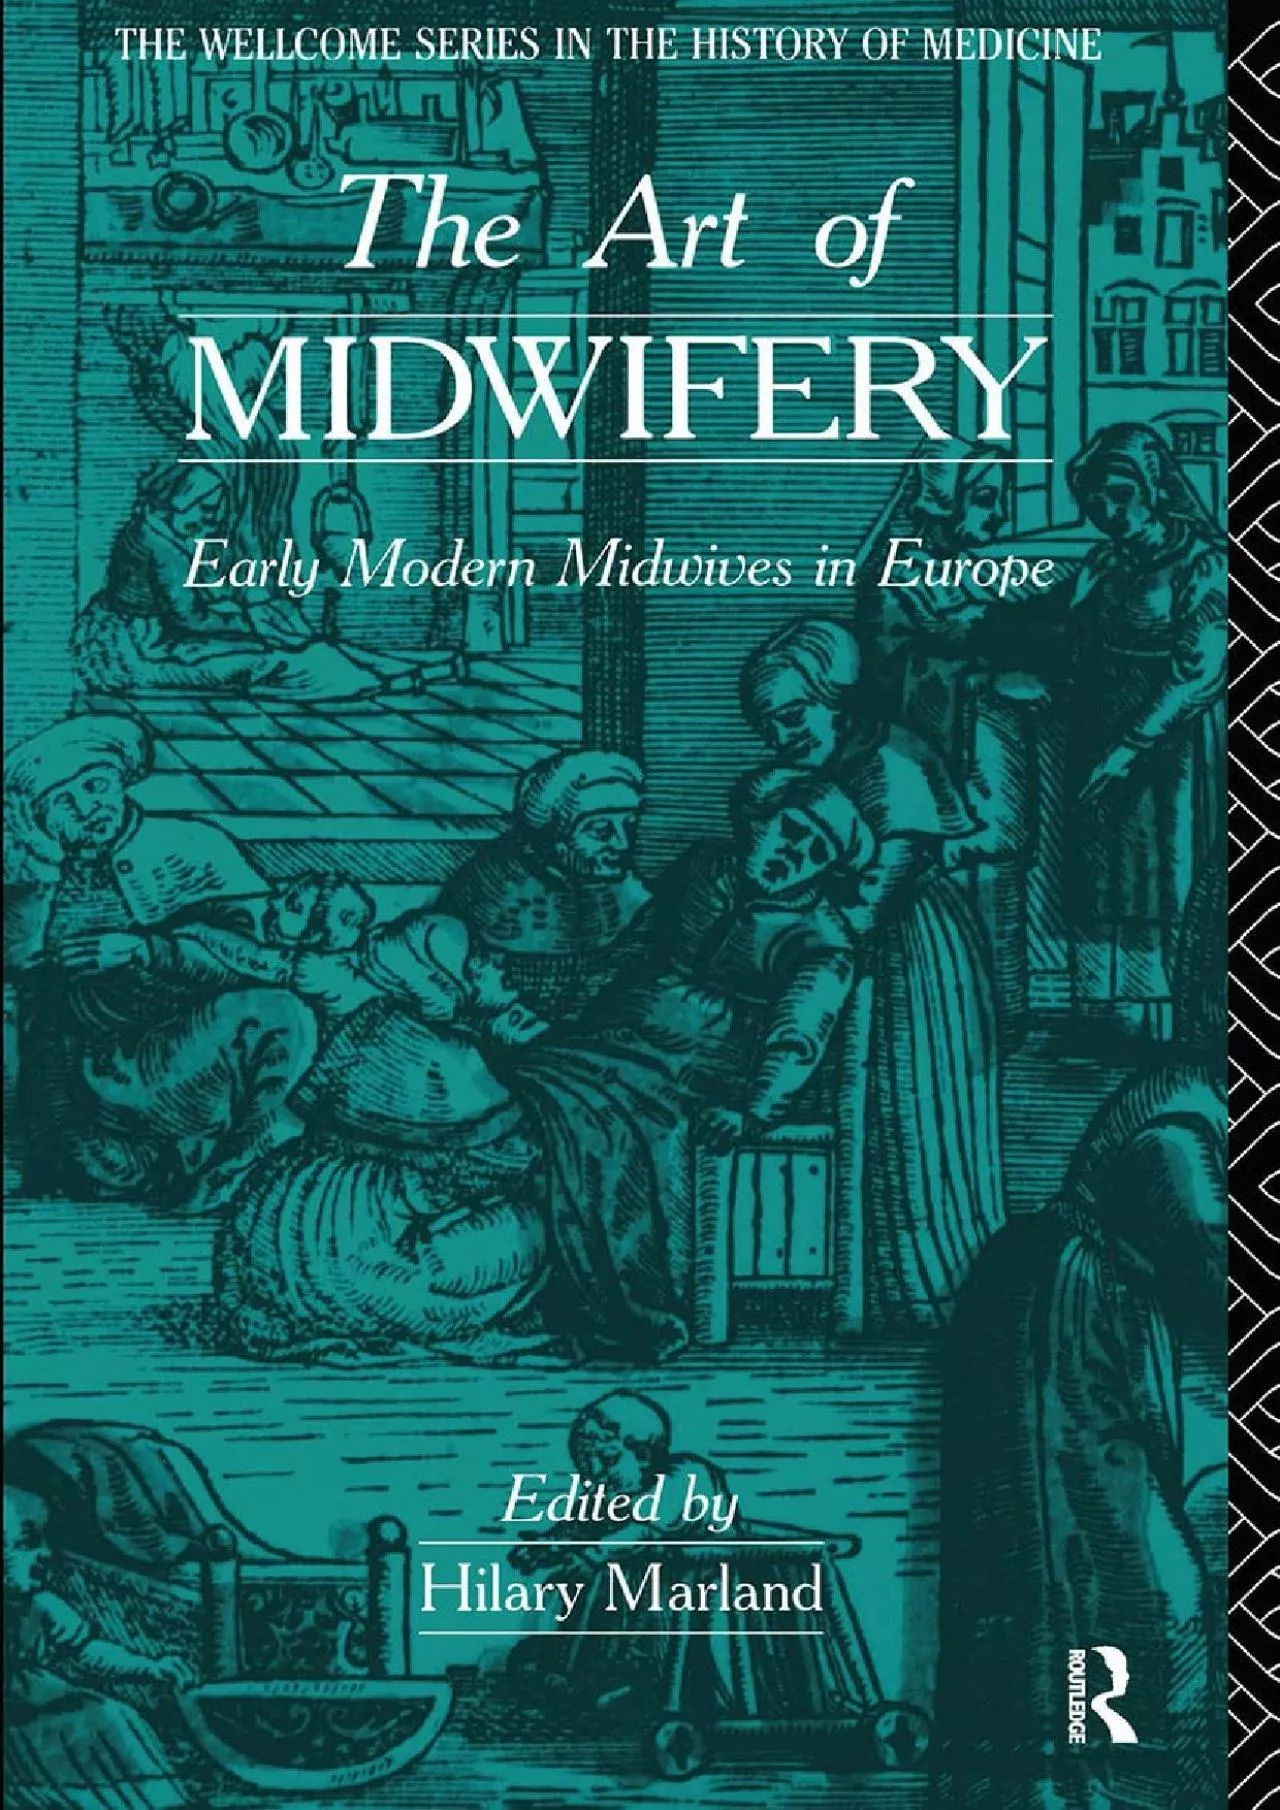 (DOWNLOAD)-The Art of Midwifery: Early Modern Midwives in Europe (Wellcome Institute Series